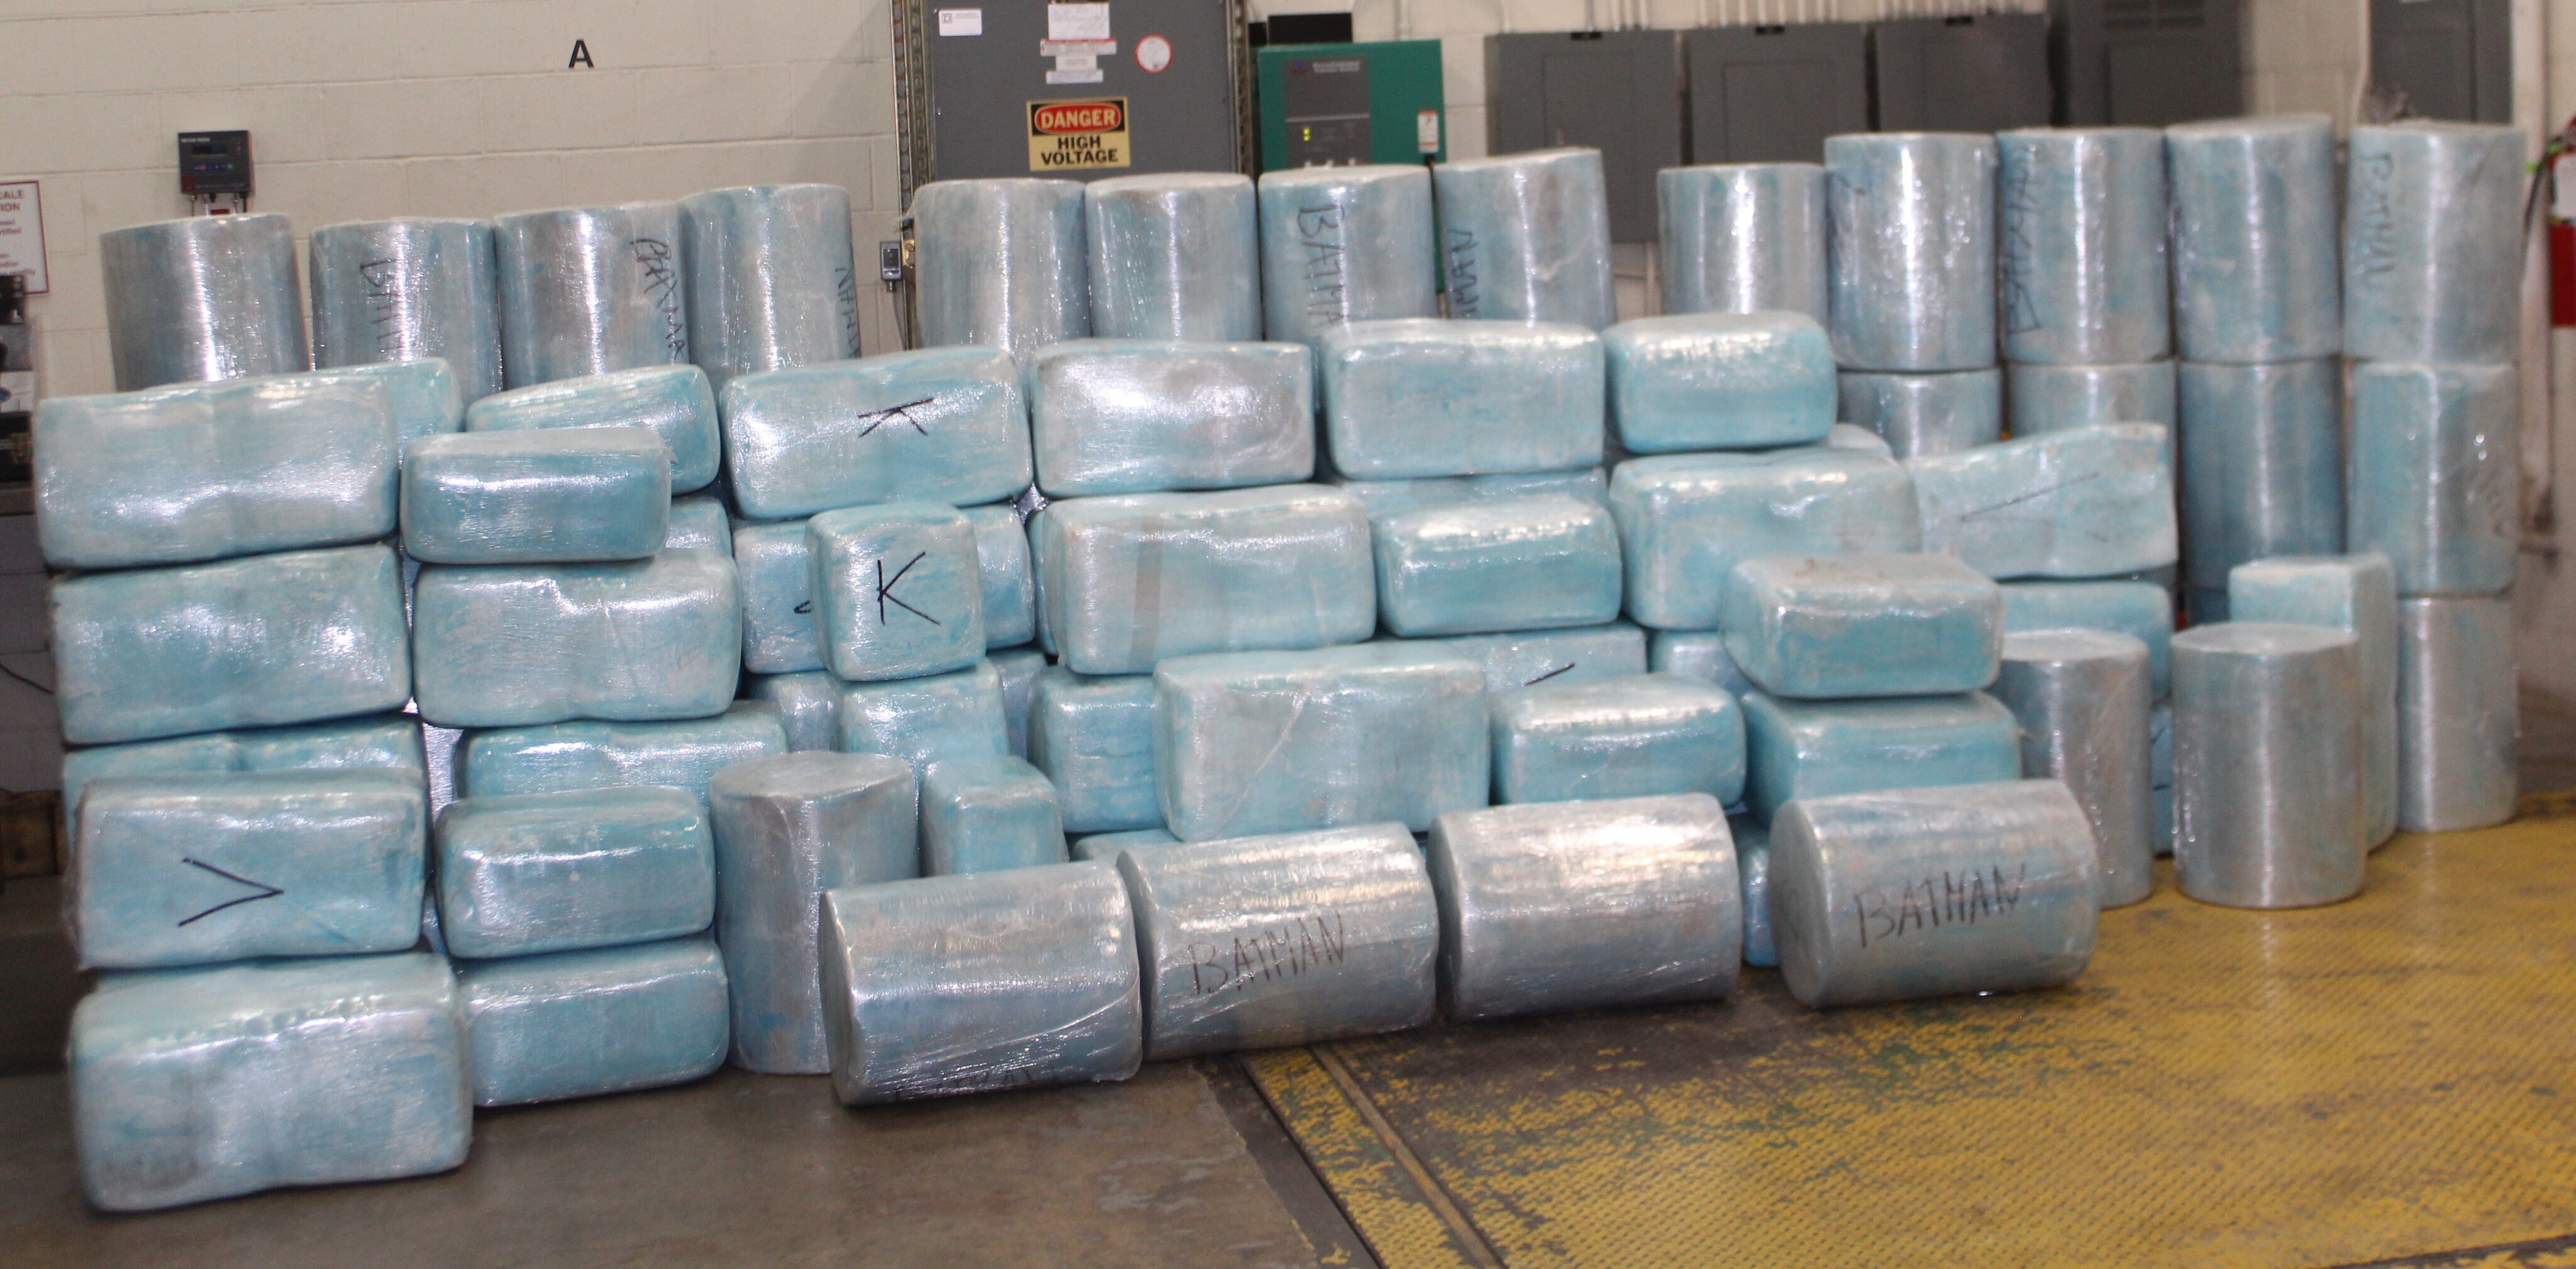 Border officials in Texas make largest cocaine bust in 20 years inside baby  wipe shipment